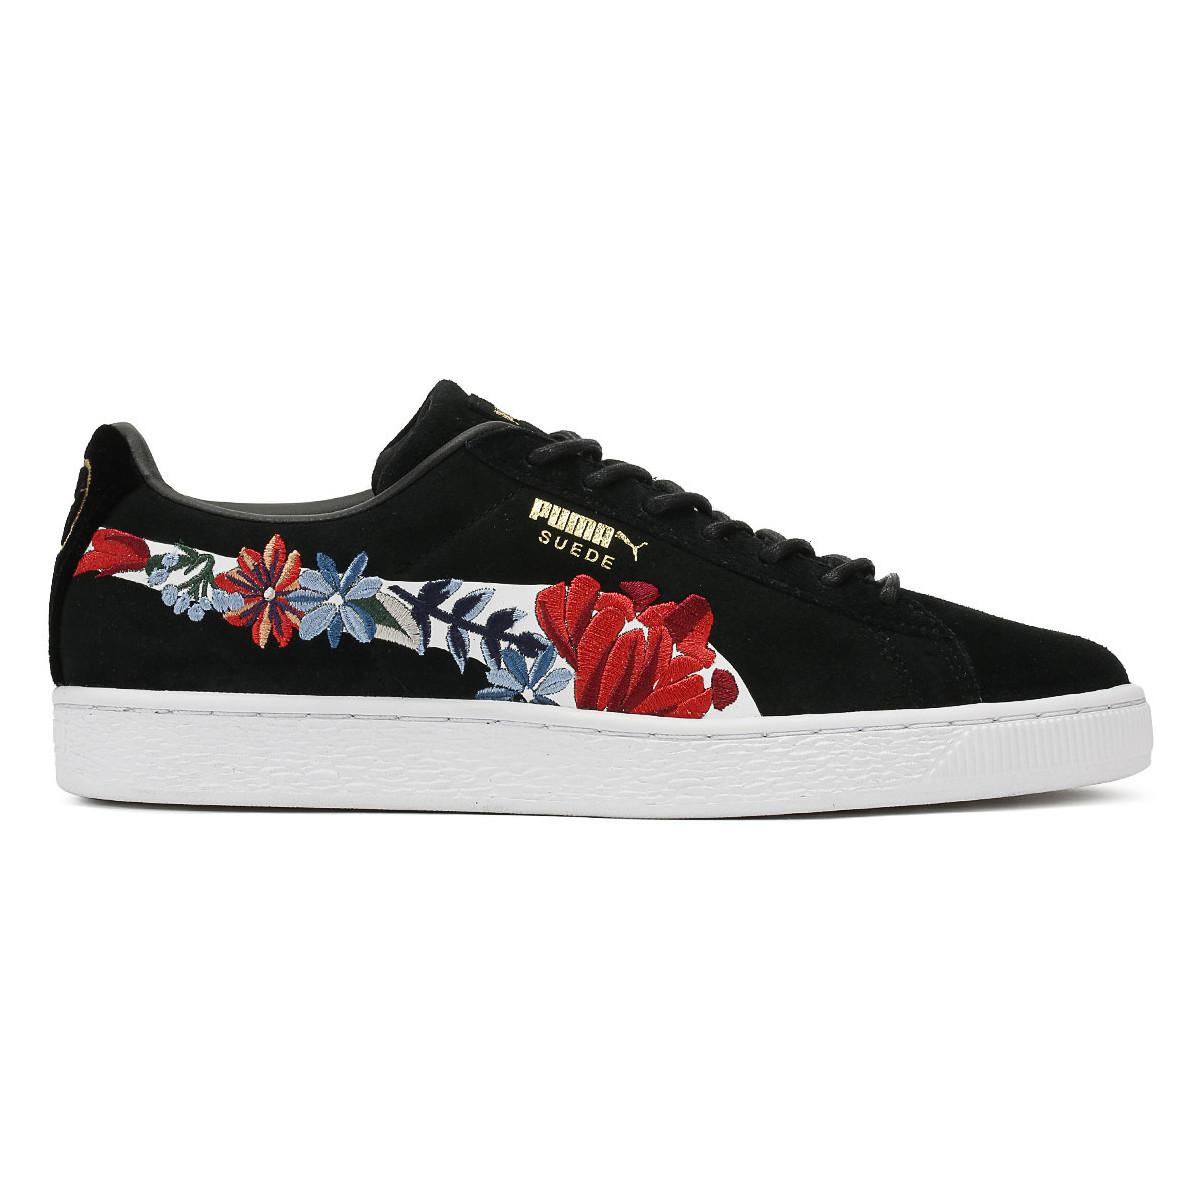 PUMA Womens Black Suede Classic Embroidery Trainers - Lyst